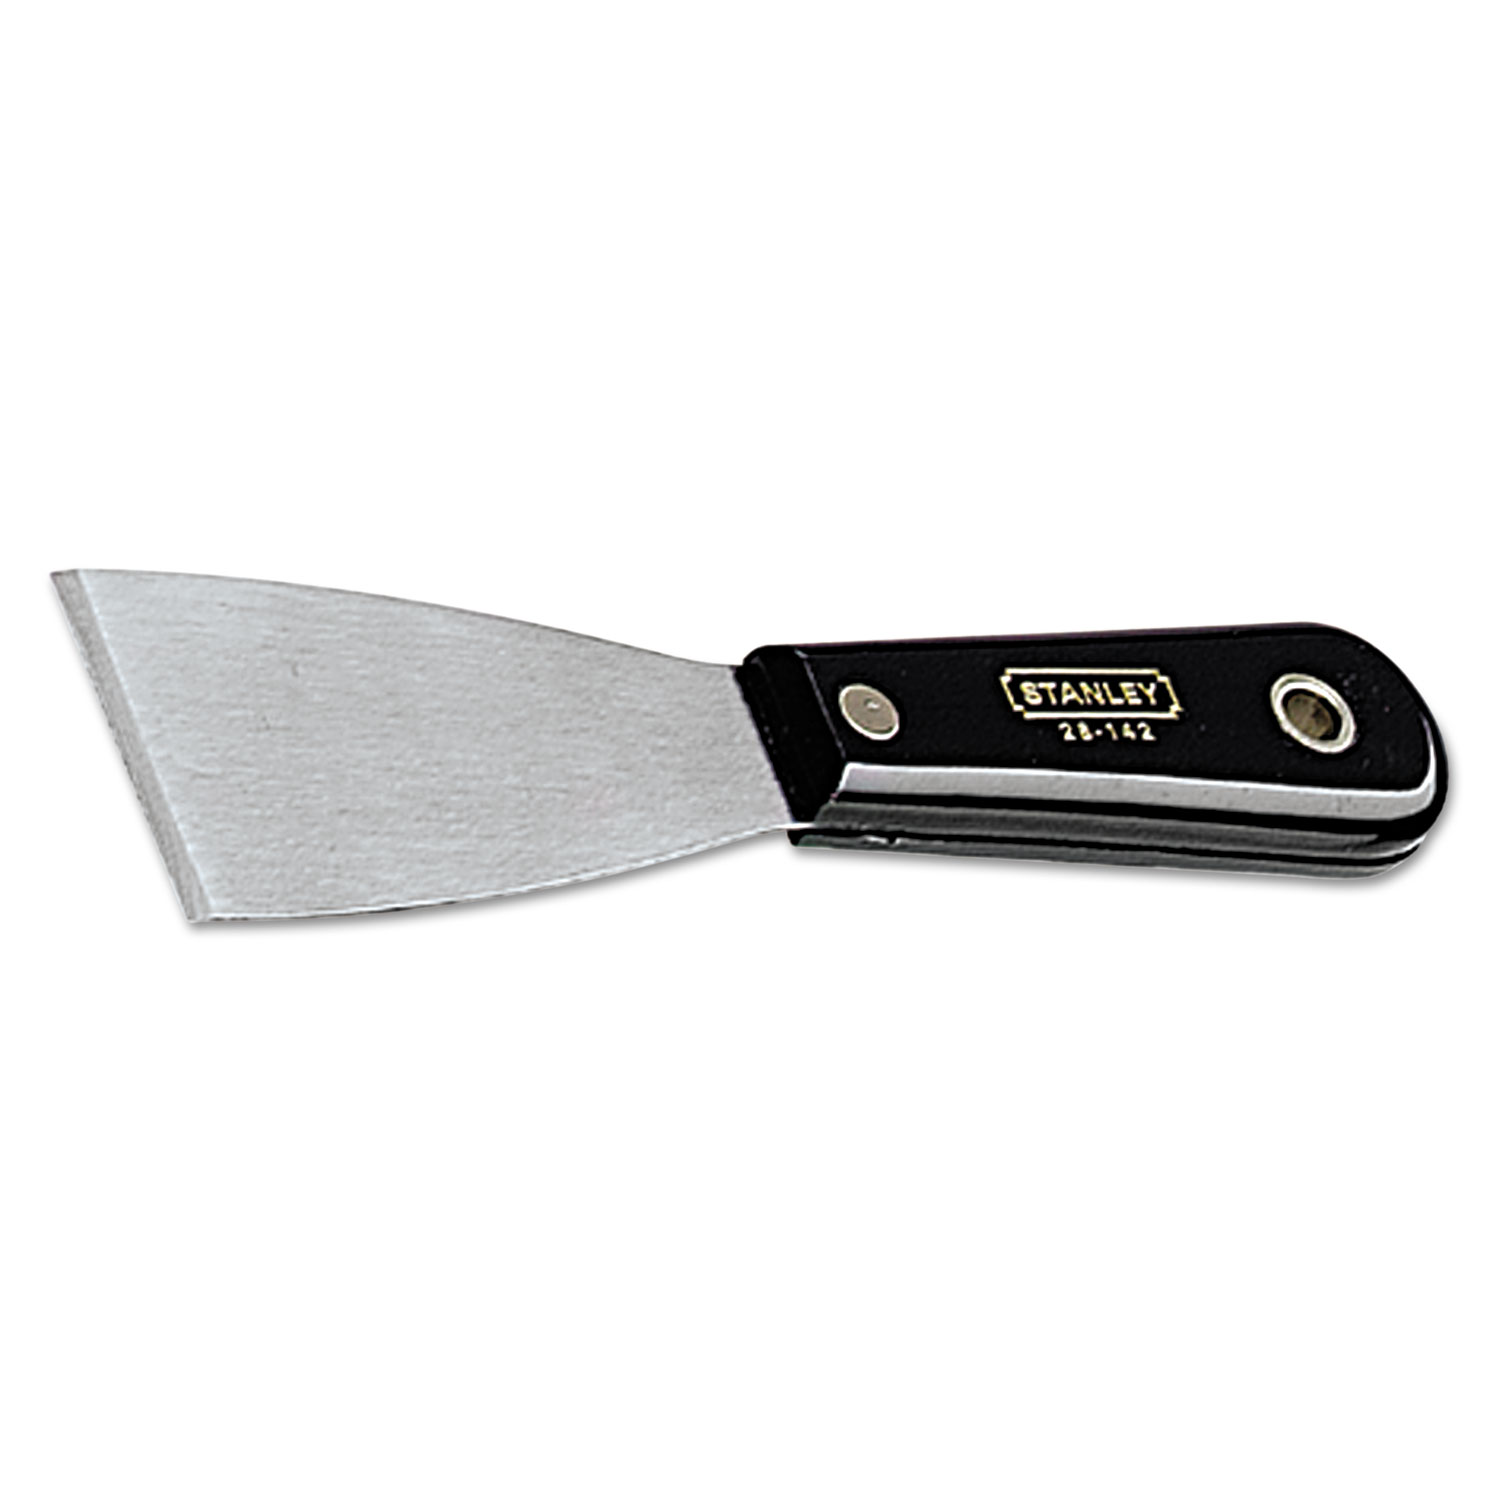  Stanley Tools 28-142 Stiff Nylon Handle Putty Knife, 2in (BOS28142) 